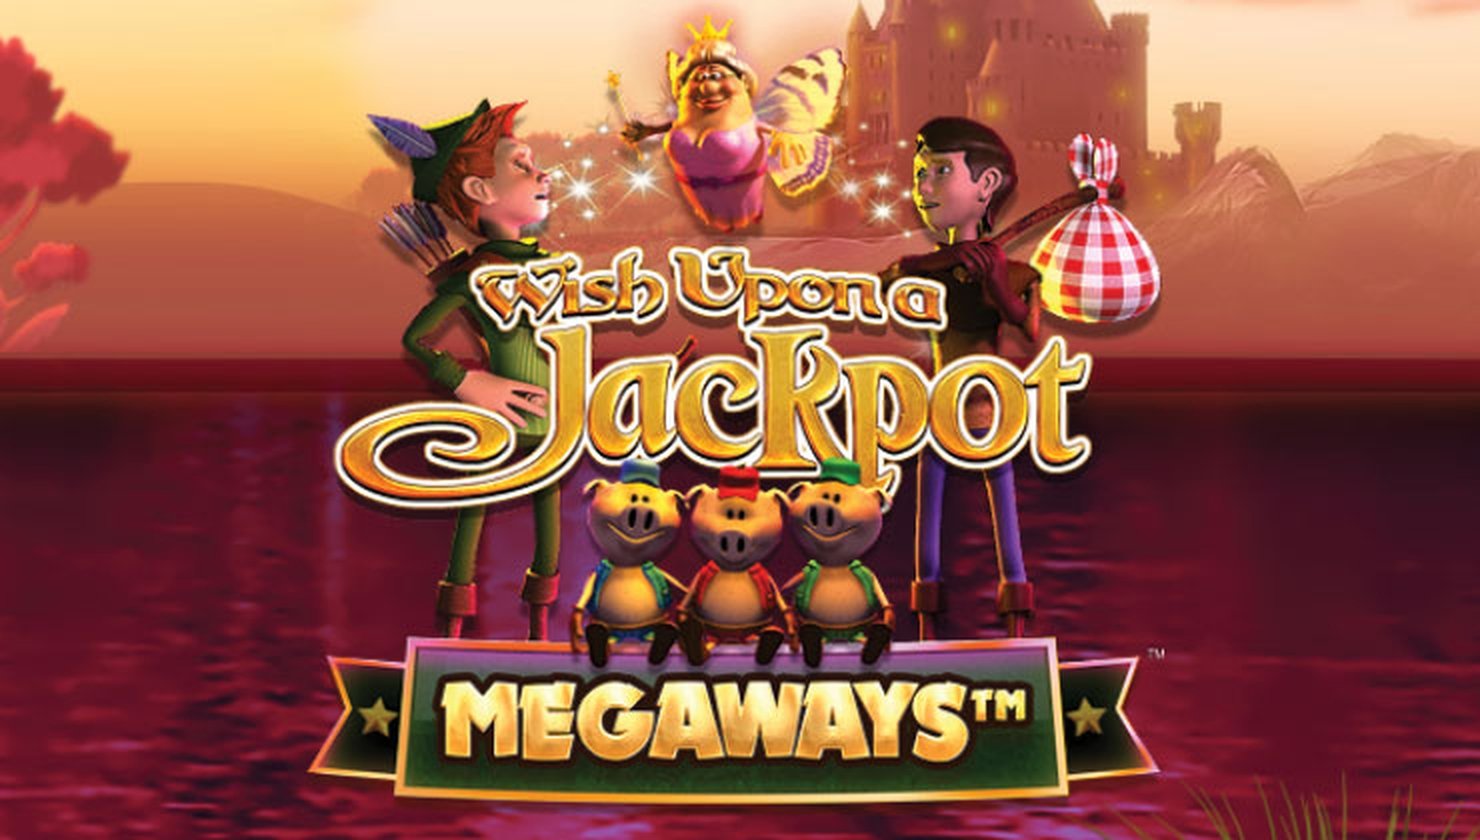 The Wish Upon A Jackpot Megaways Online Slot Demo Game by Blueprint Gaming